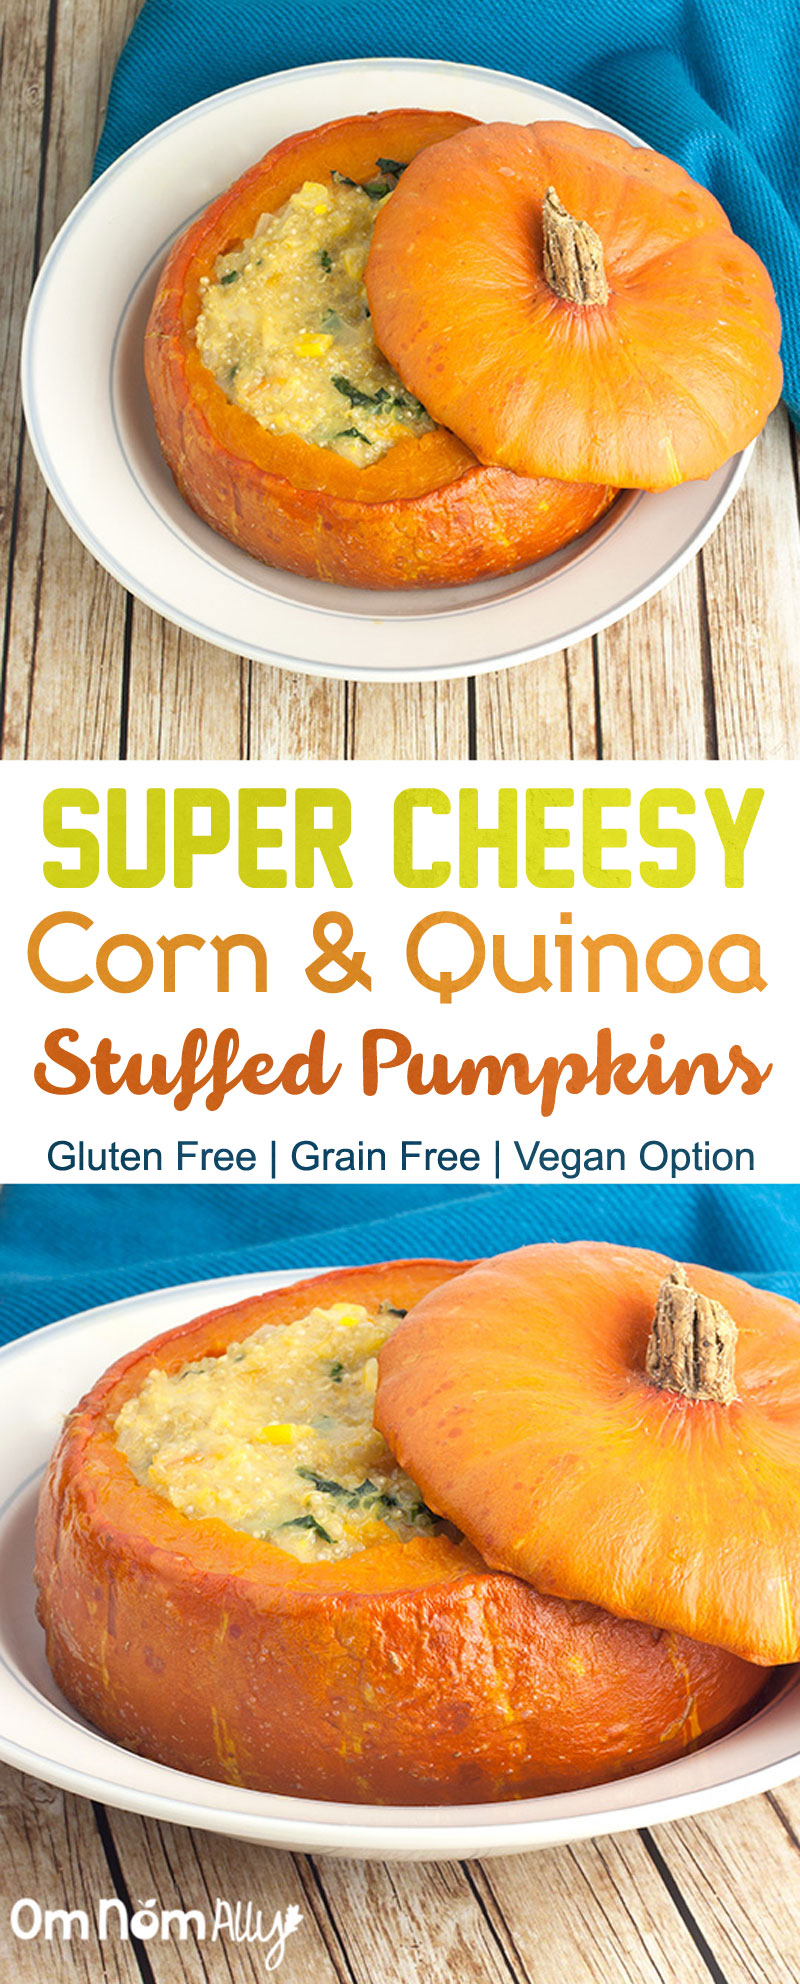 Super Cheesy Corn & Quinoa Stuffed Pumpkins @OmNomAlly | These Golden Nugget pumpkins were just made for stuffing - with thin, edible skin you can eat your cheesy corn and quinoa stuffing and then your pumpkin bowl too!